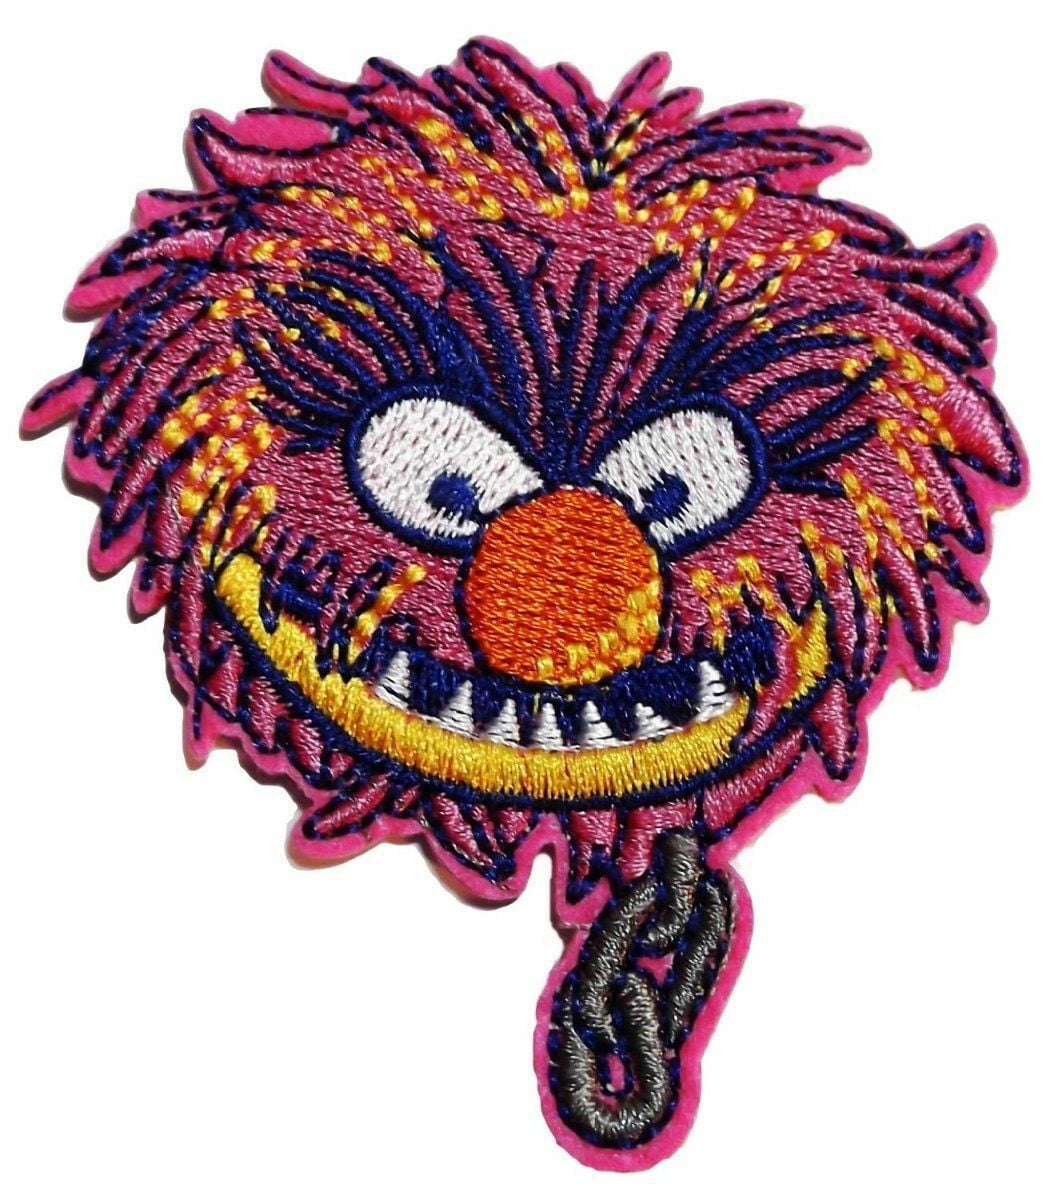 The Muppets Animal Cartoon Character 2 1/4